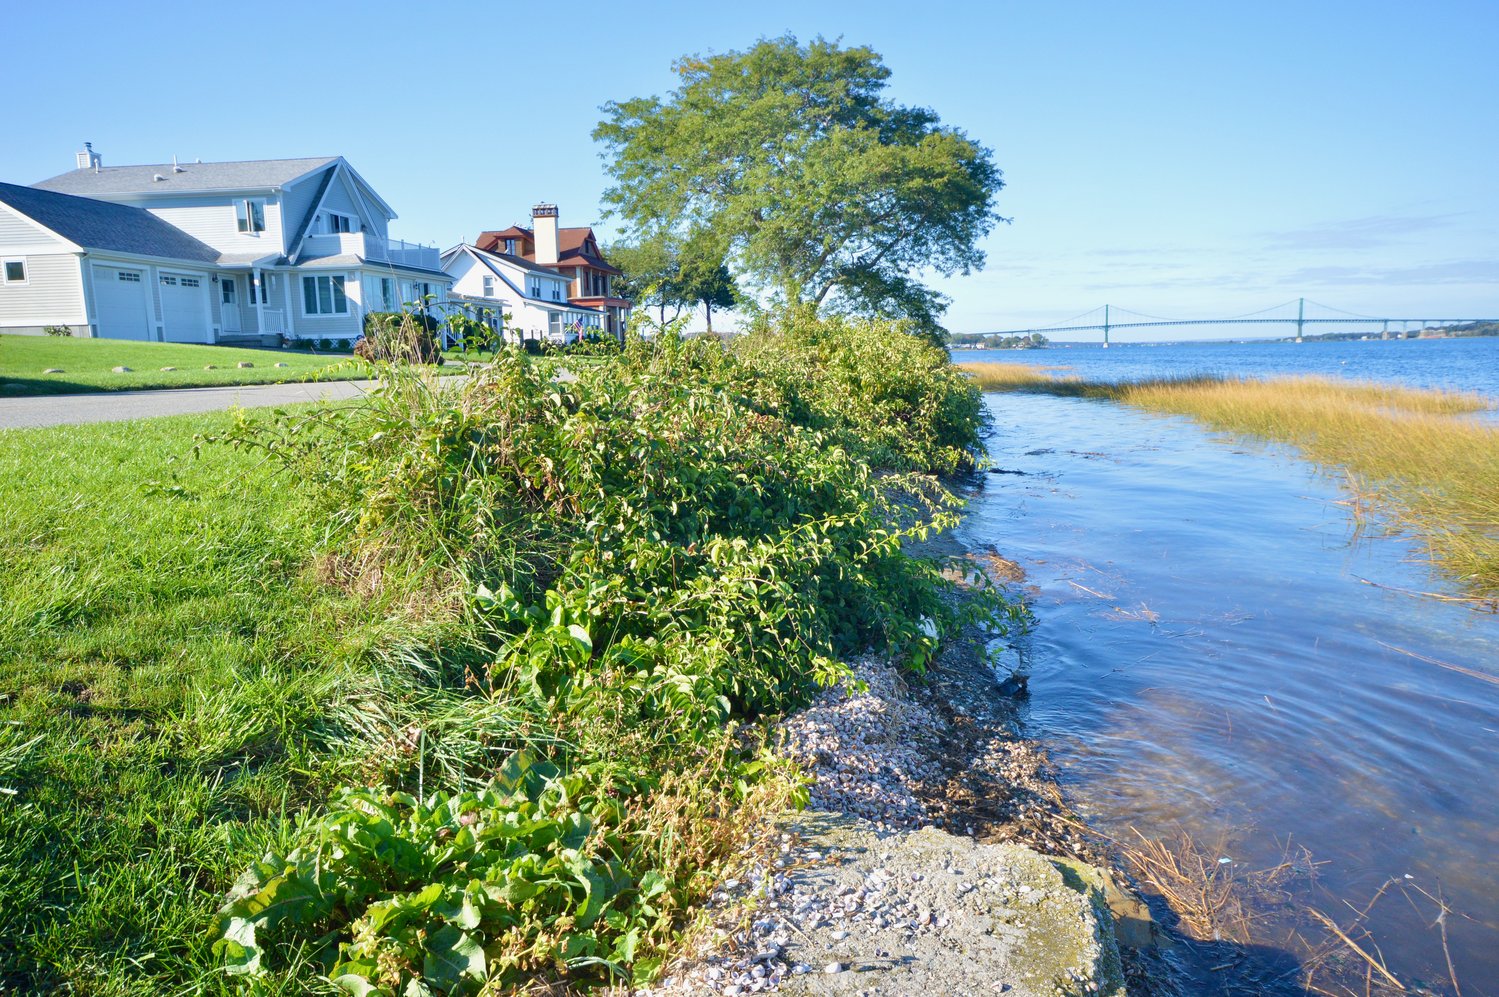 In Portsmouth Building a path toward climate resiliency EastBayRI